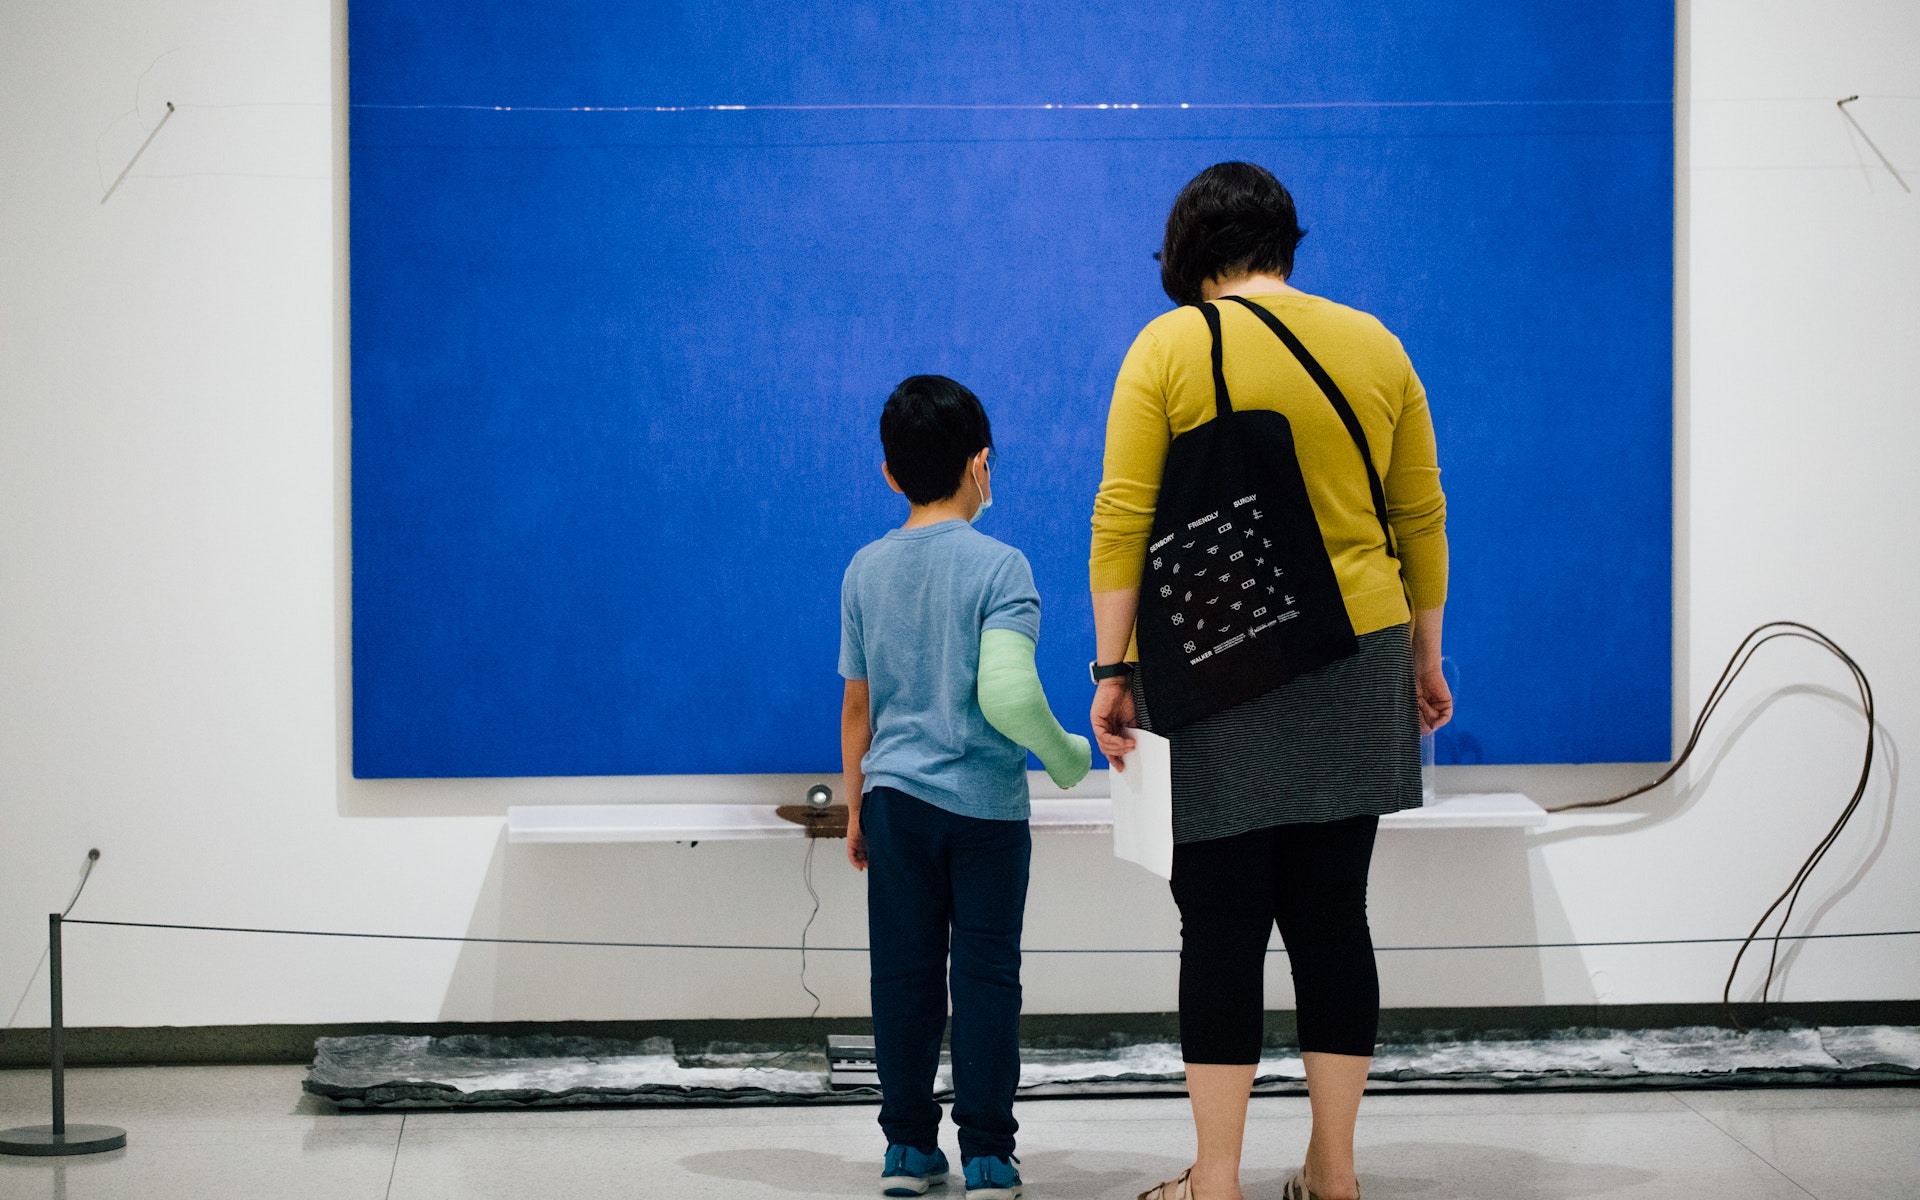 An adult and child looking at art, seen from behind